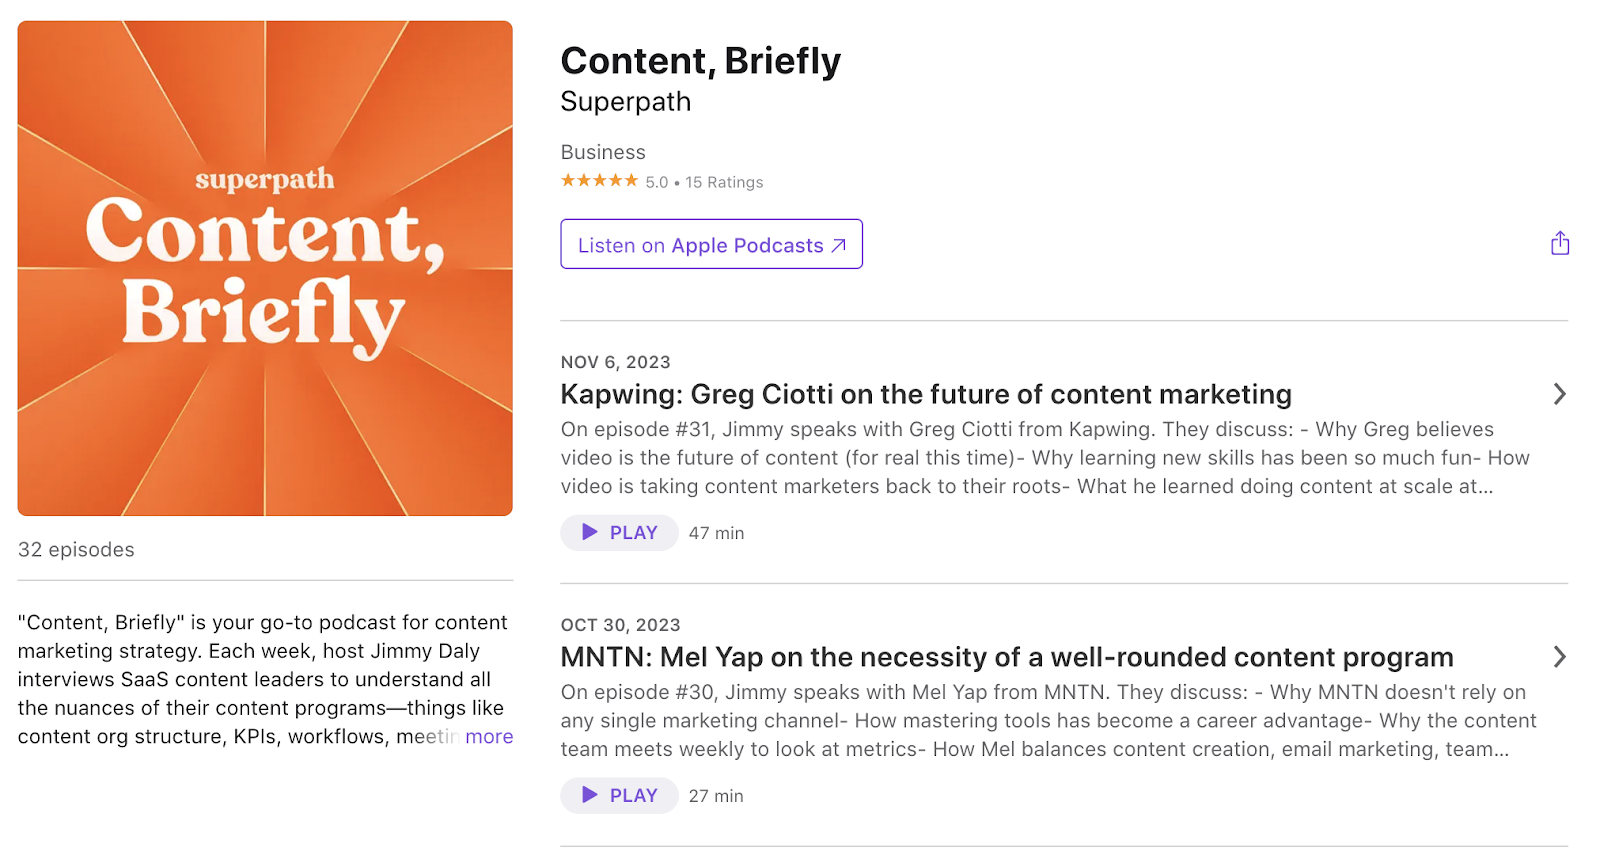 “Content, Briefly” podcast page